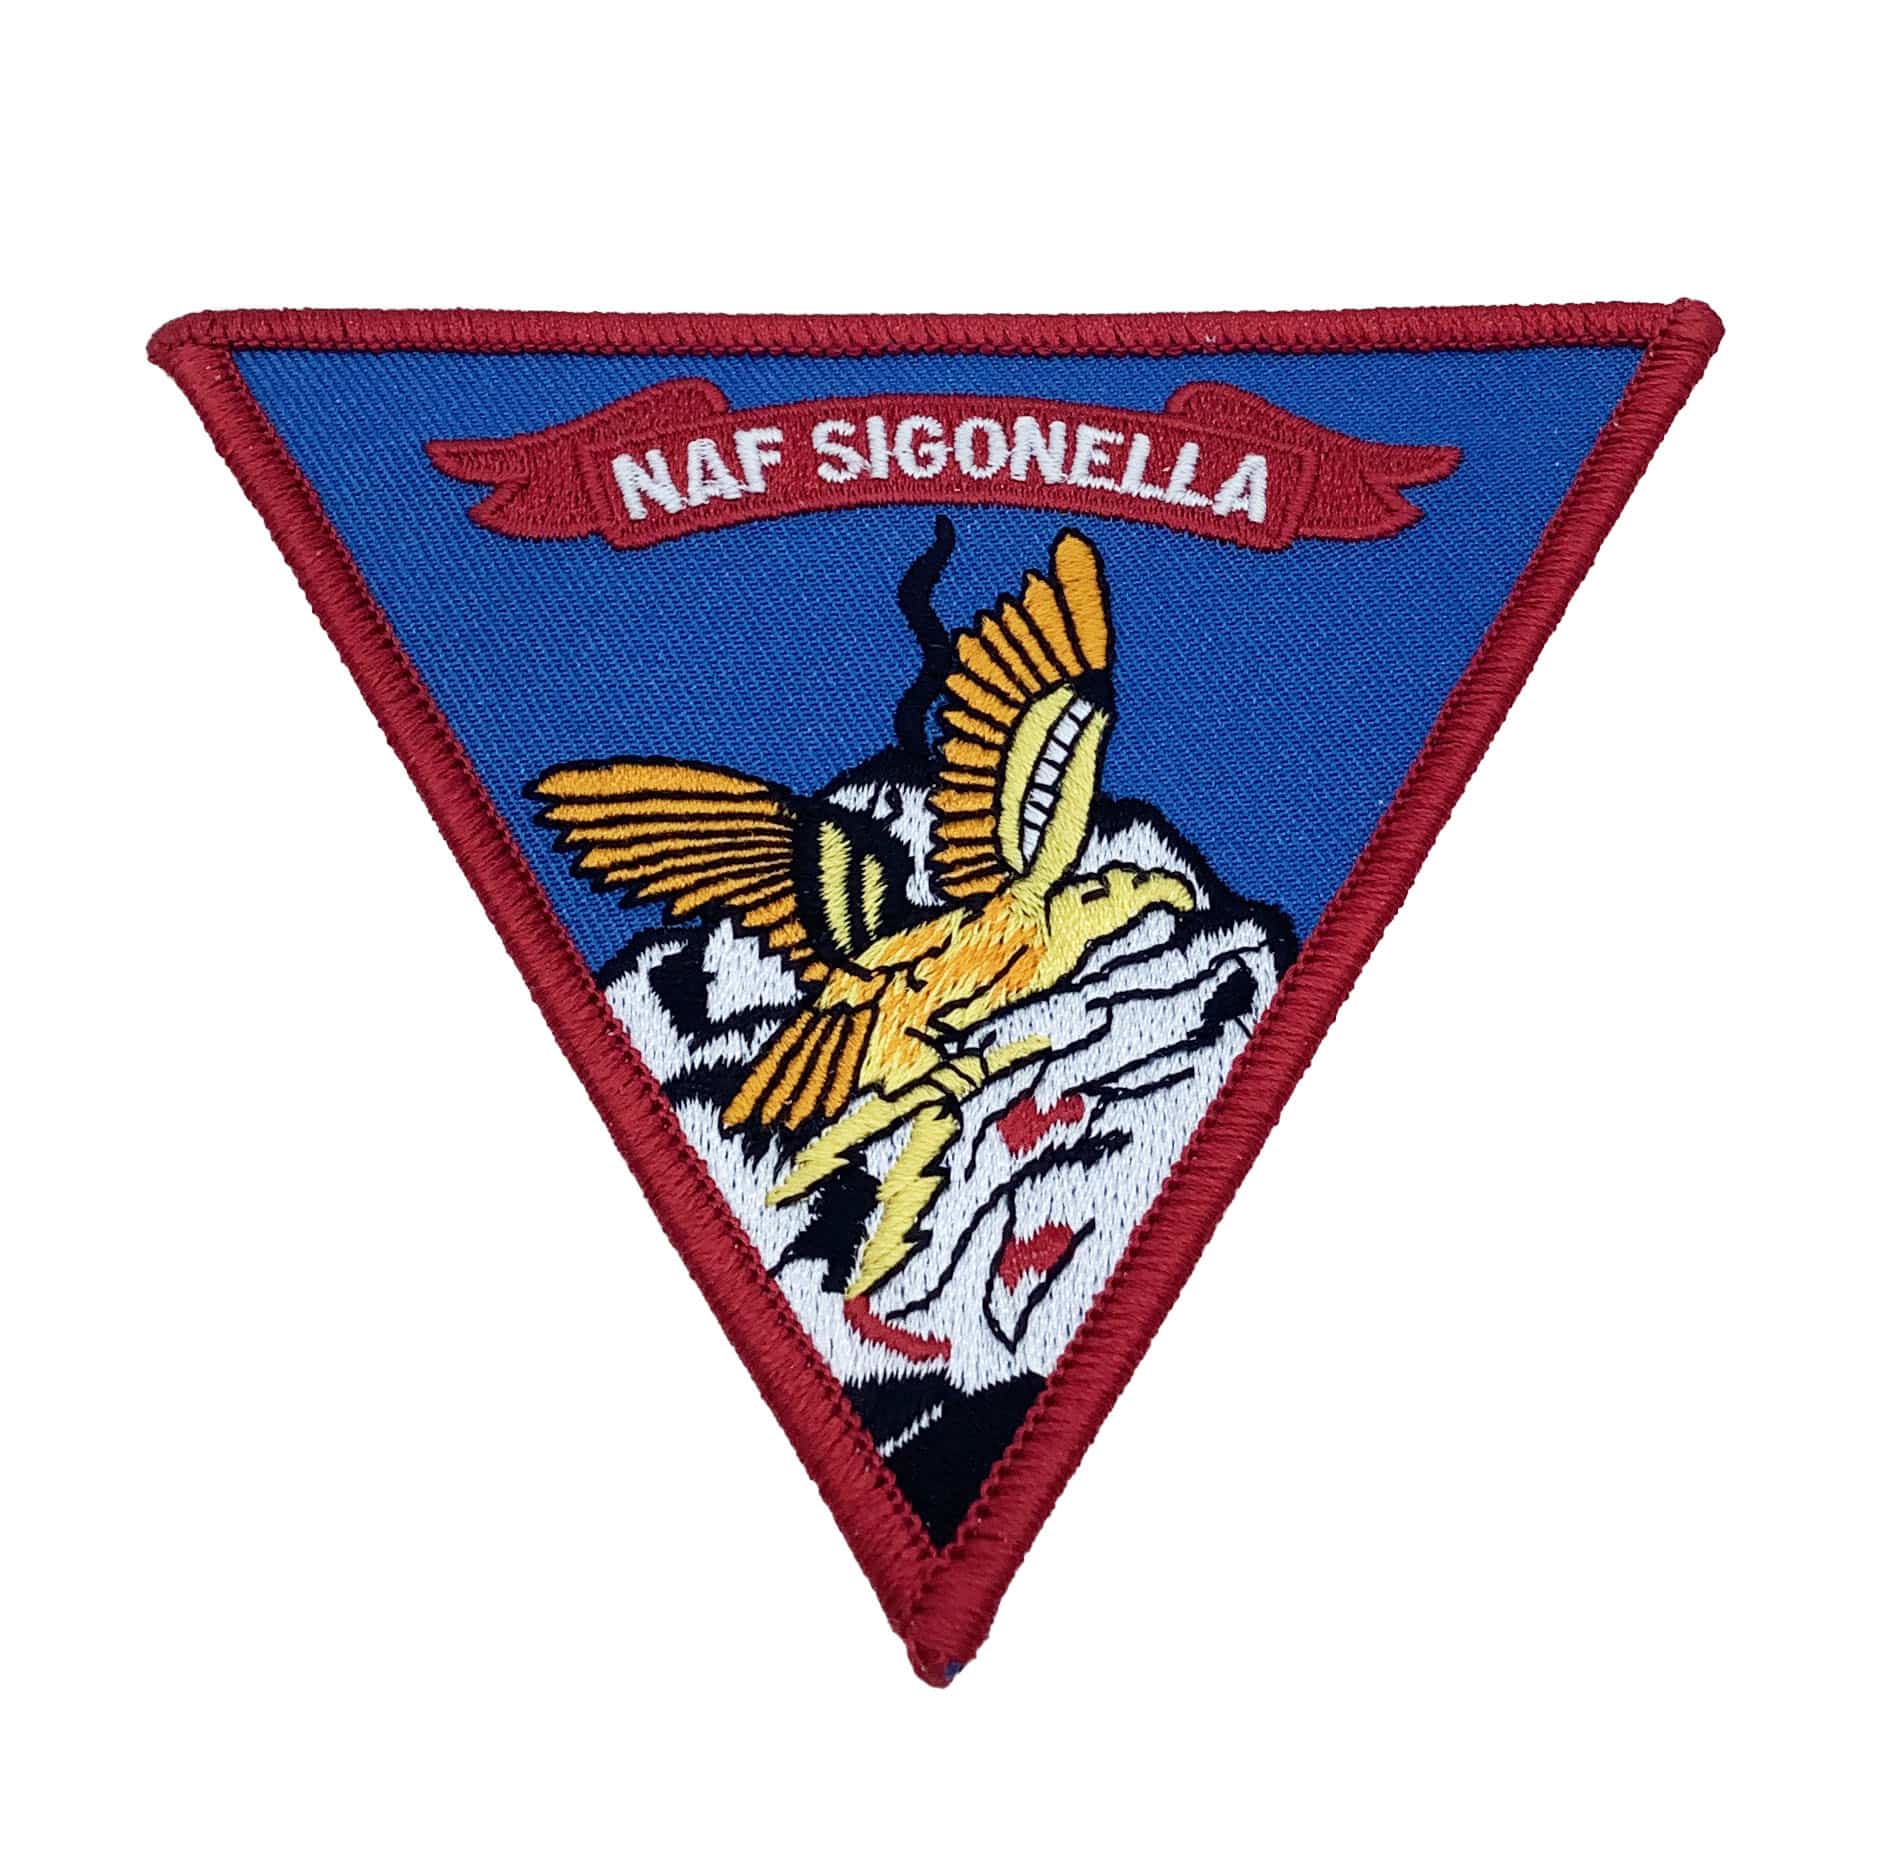 NAF Sigonella Patch - With Hook and Loop